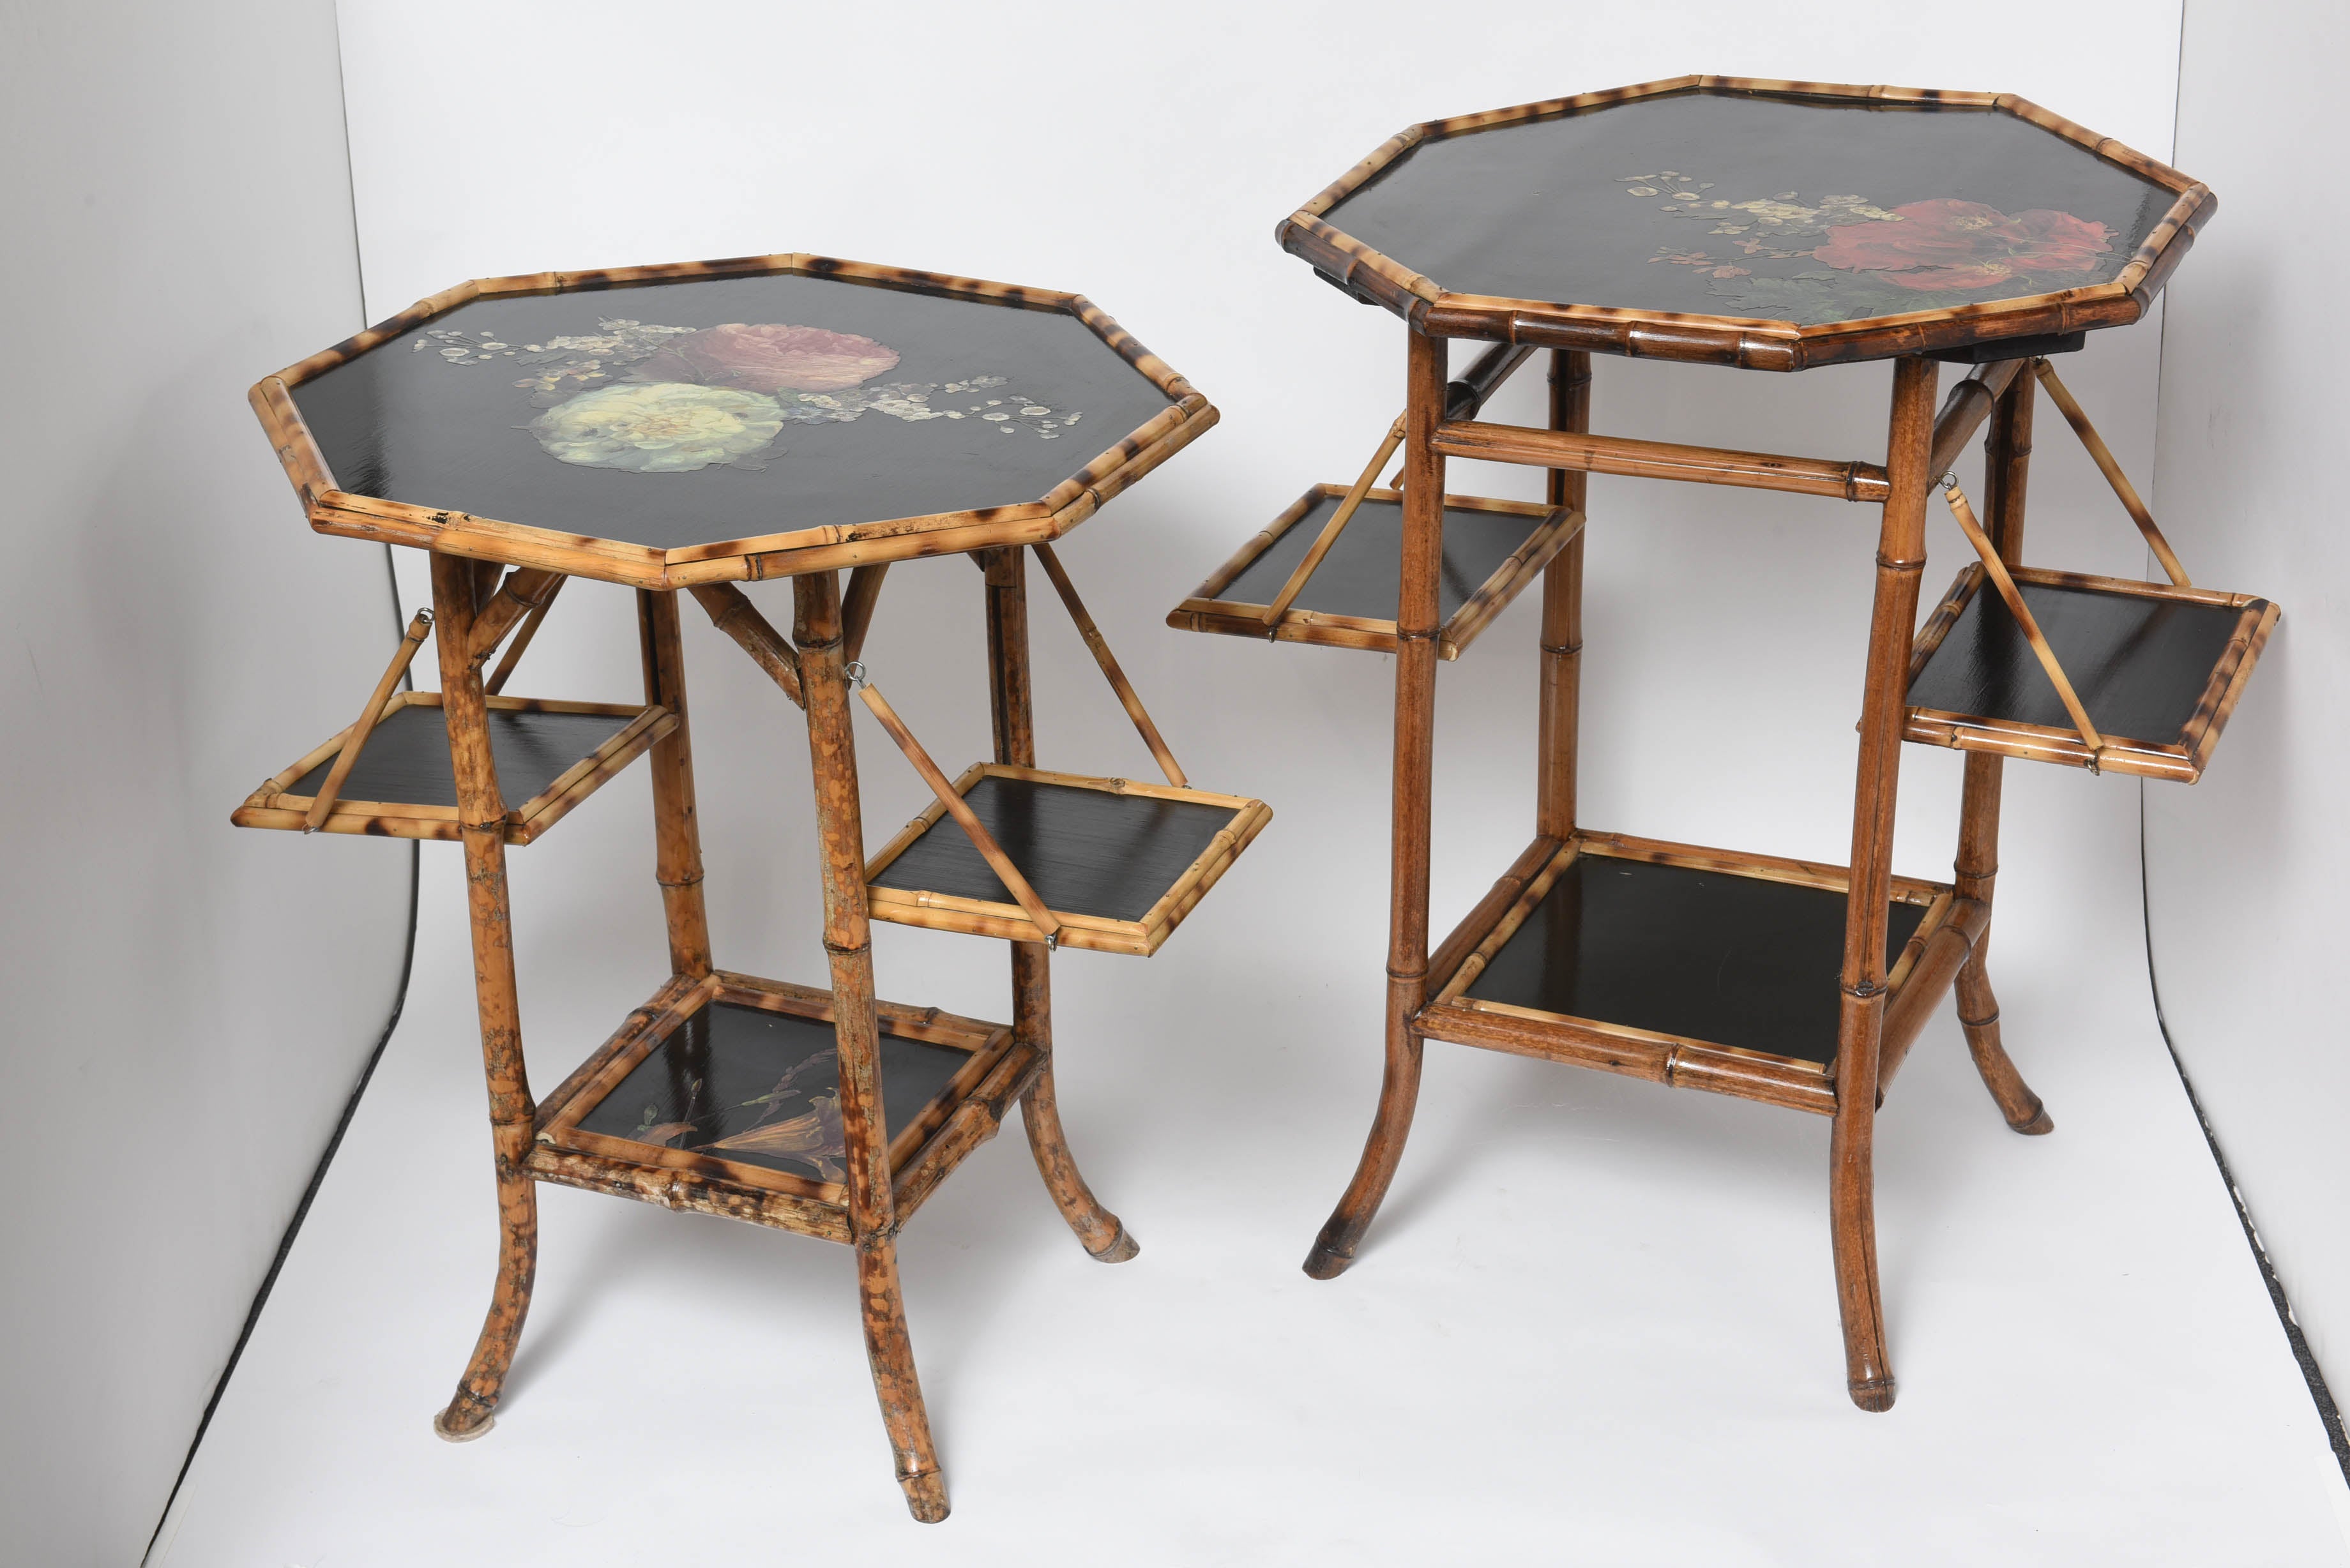 Superb Set of Antique English Bamboo Pastry Tables